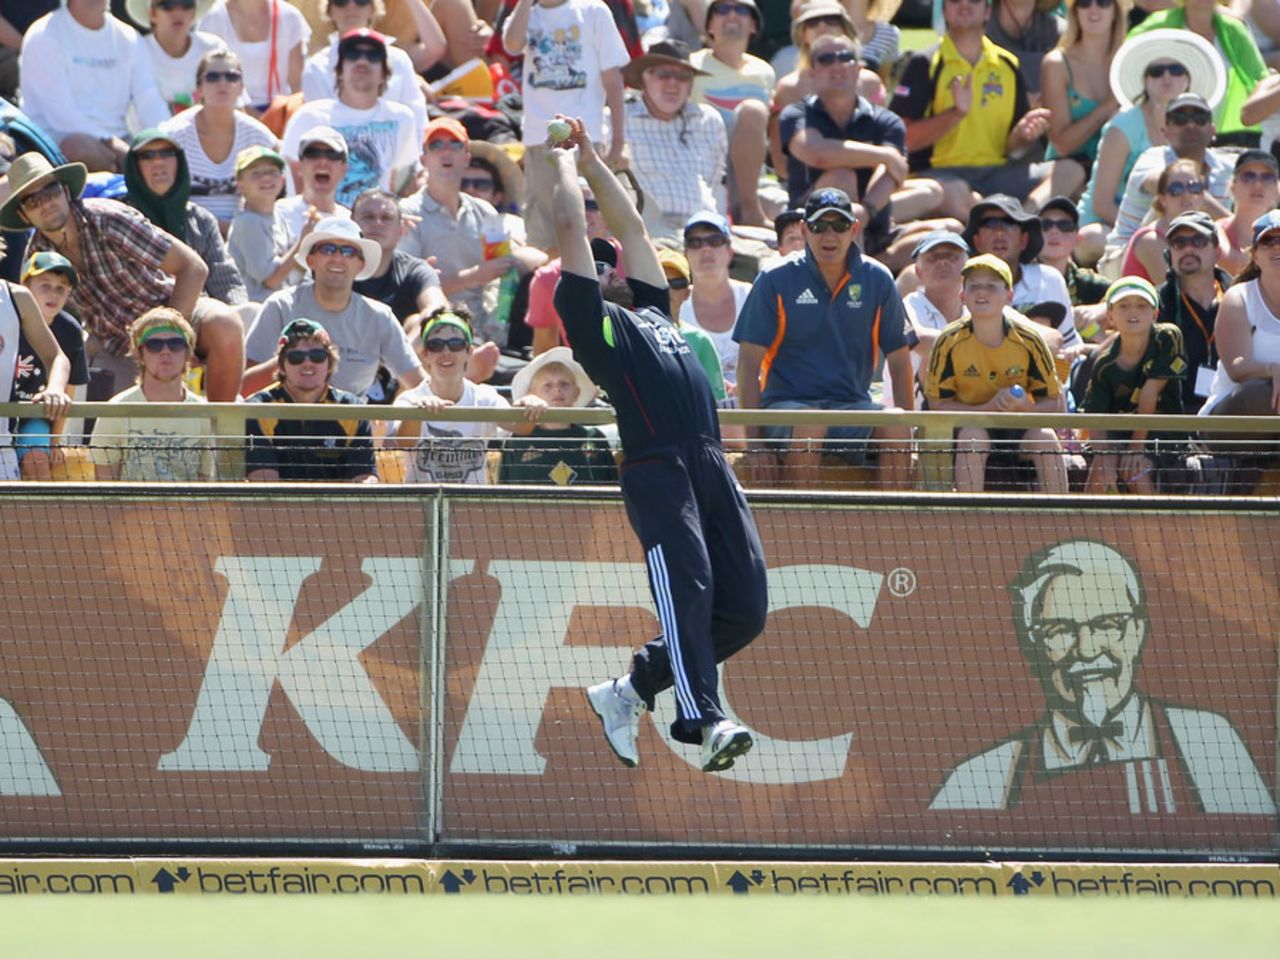 The unfamiliar sight of Matt Prior leaping to take a catch in the outfield, Australia v England, 7th ODI, Perth, February 6 2011